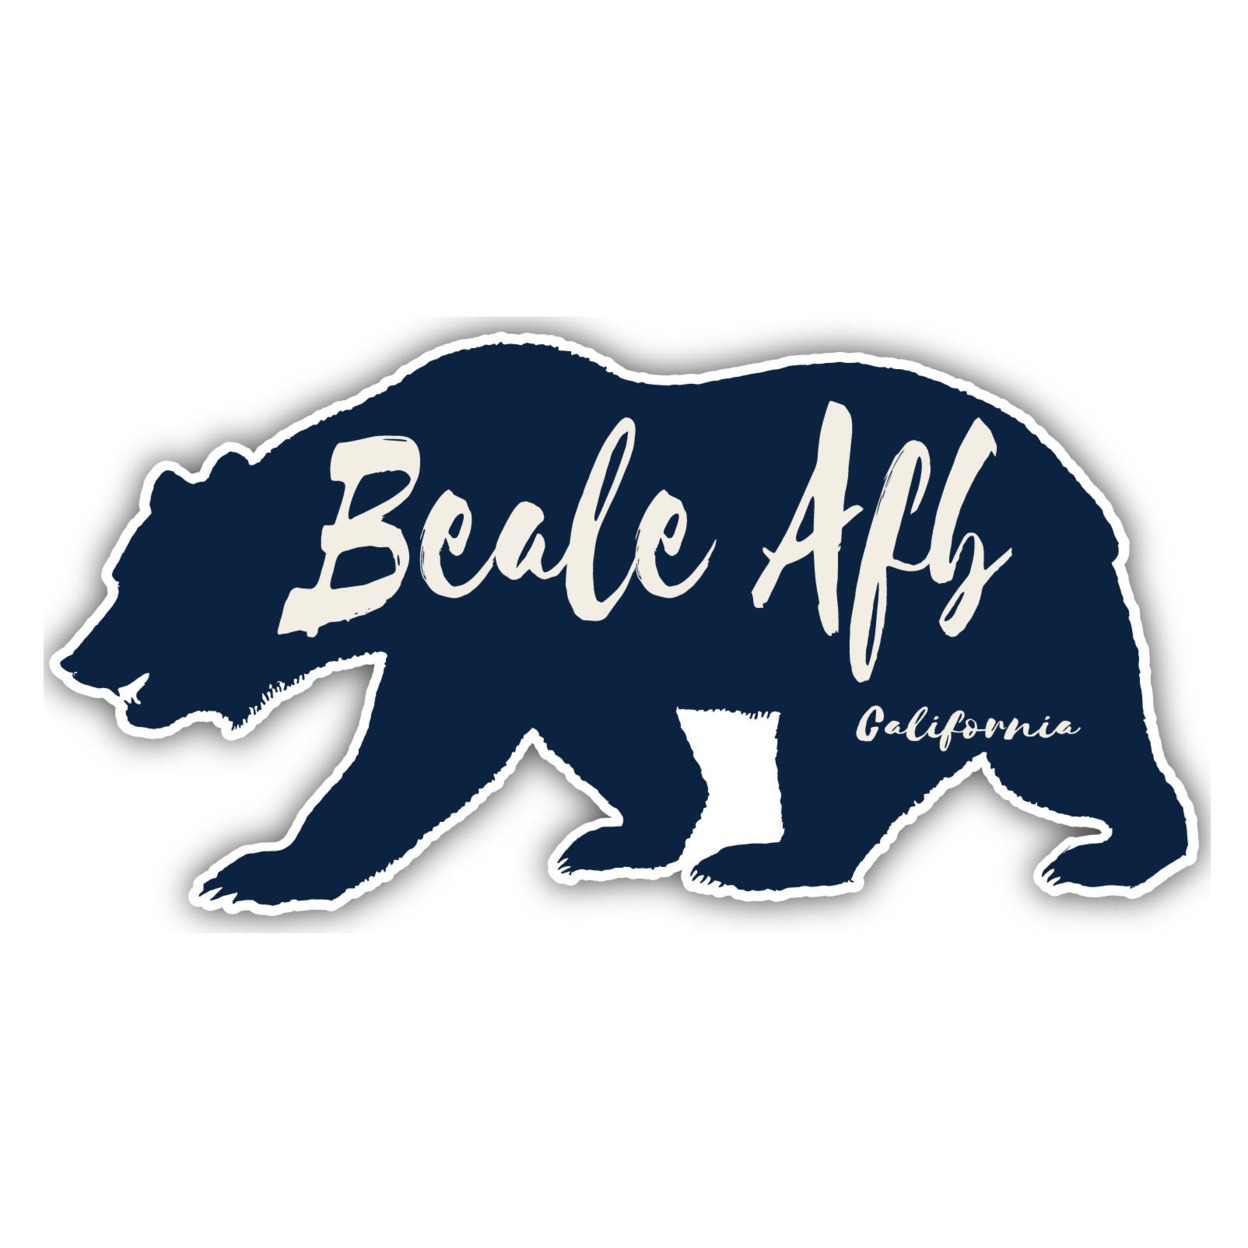 Beale AFB California Souvenir Decorative Stickers (Choose Theme And Size) - 4-Pack, 2-Inch, Bear